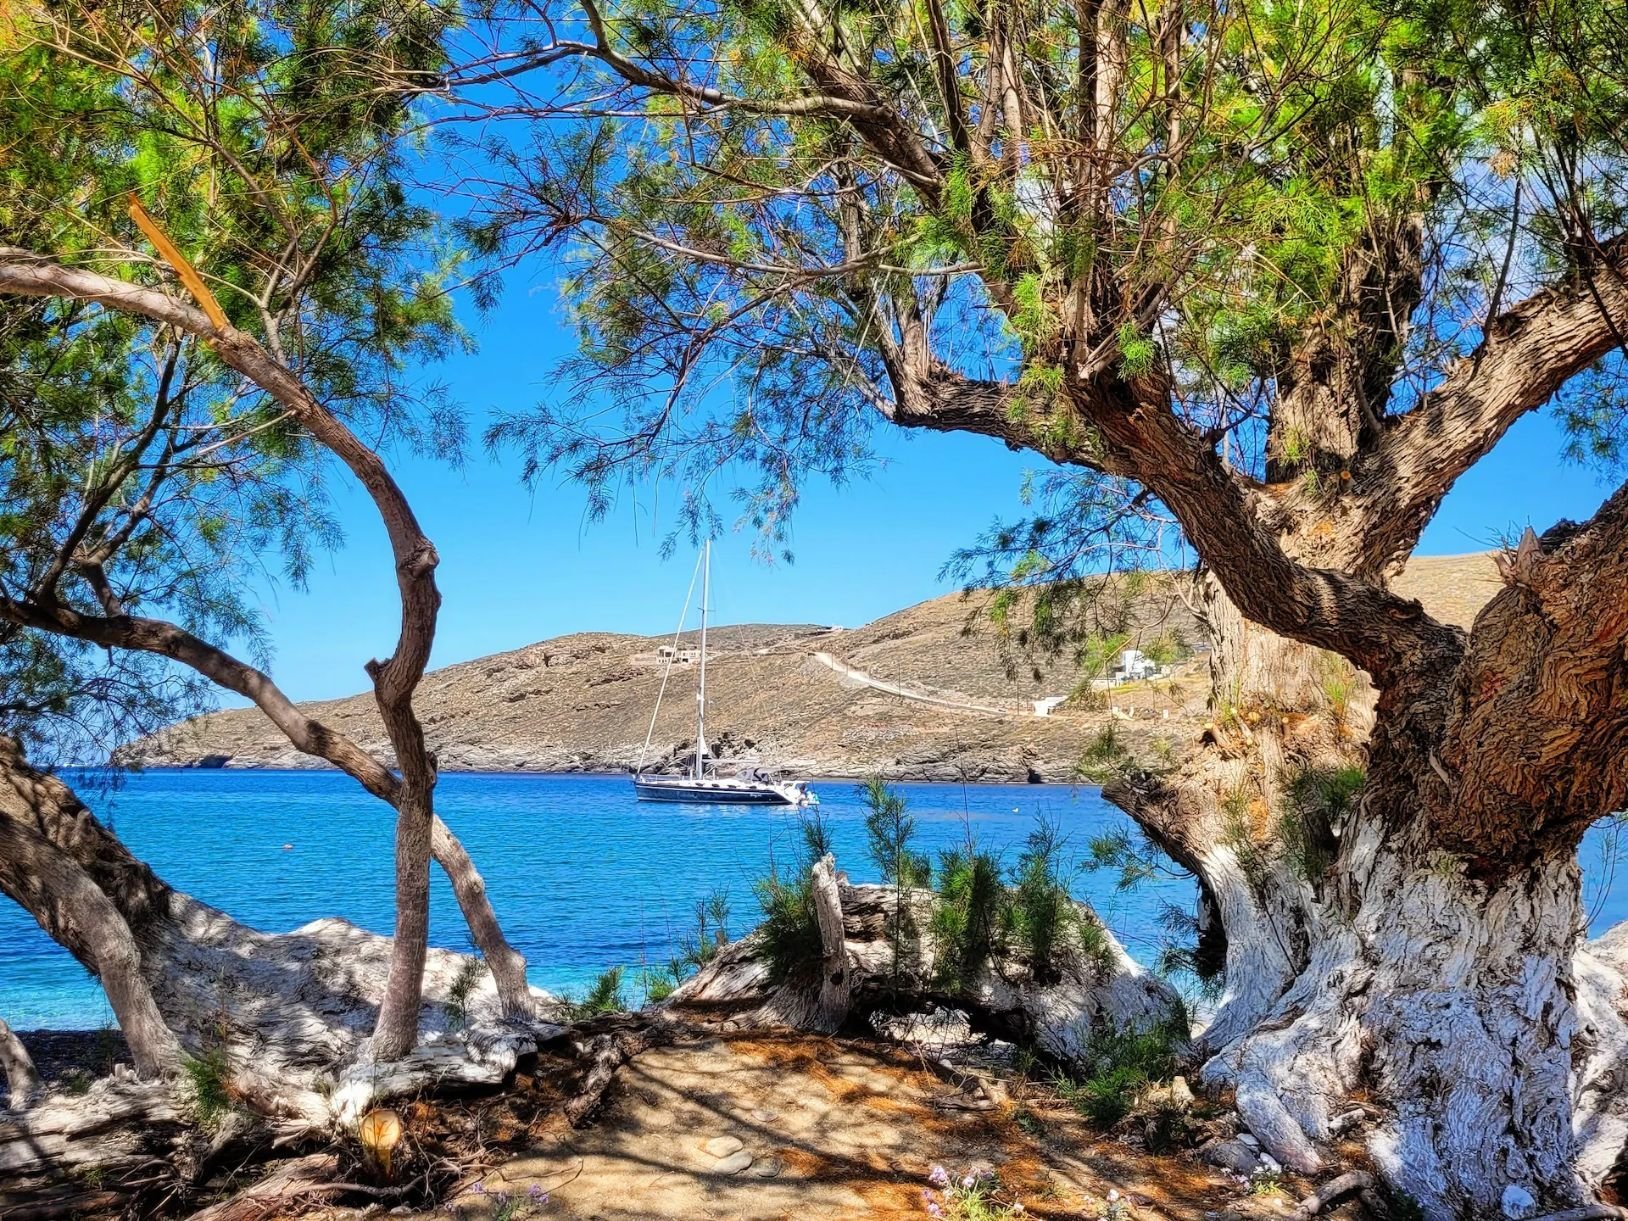 Beautiful Kythnos, one of the most authentic Greek islands in the Cyclades. Photo: Getty.